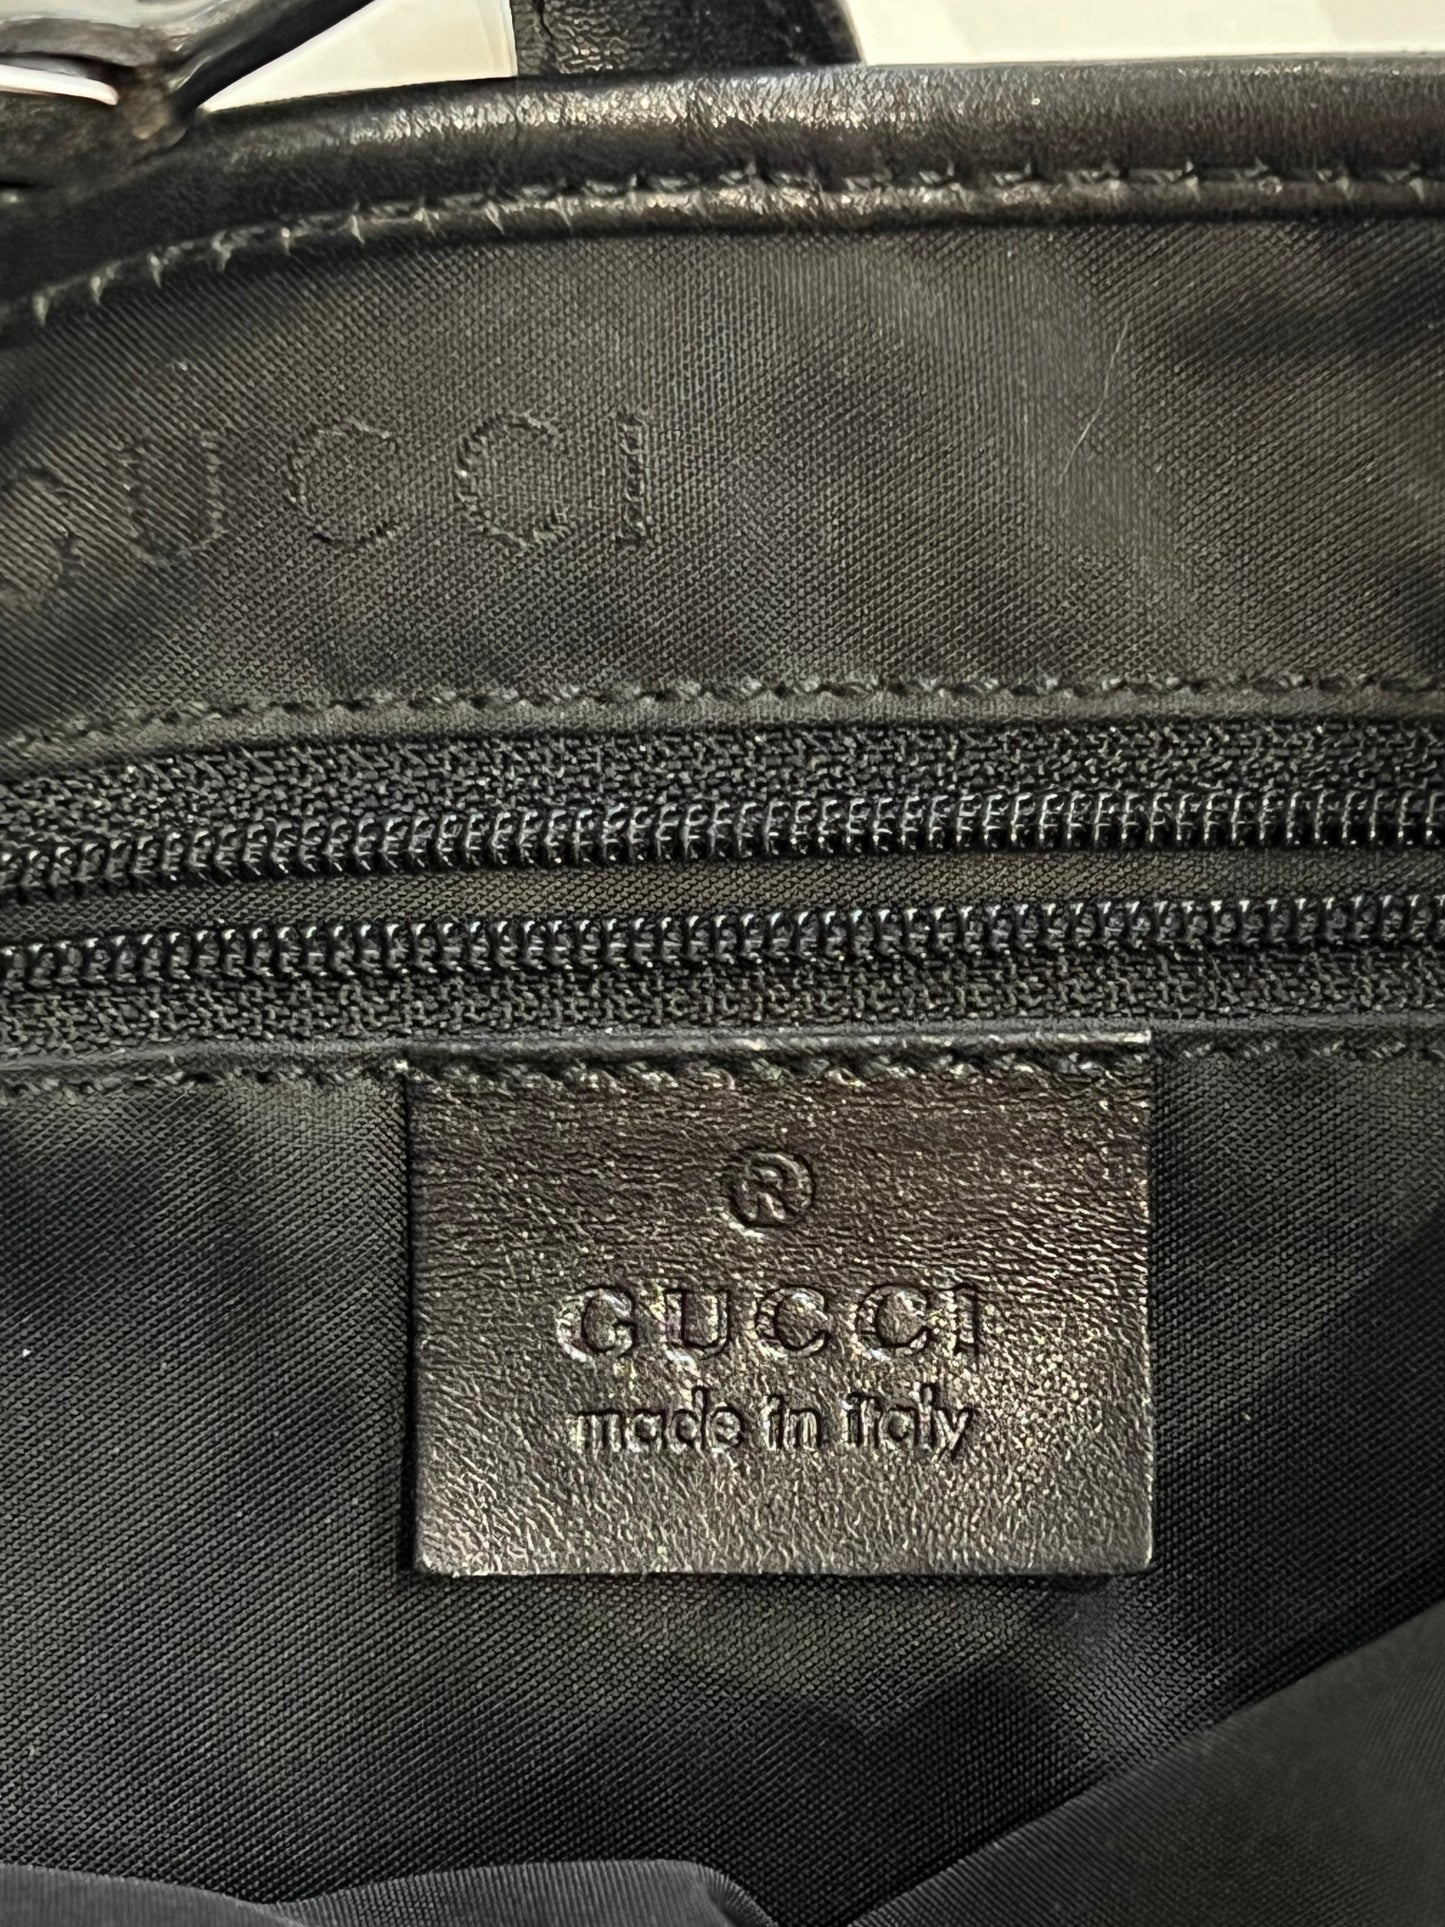 Gucci Jackie bag by Tom Ford